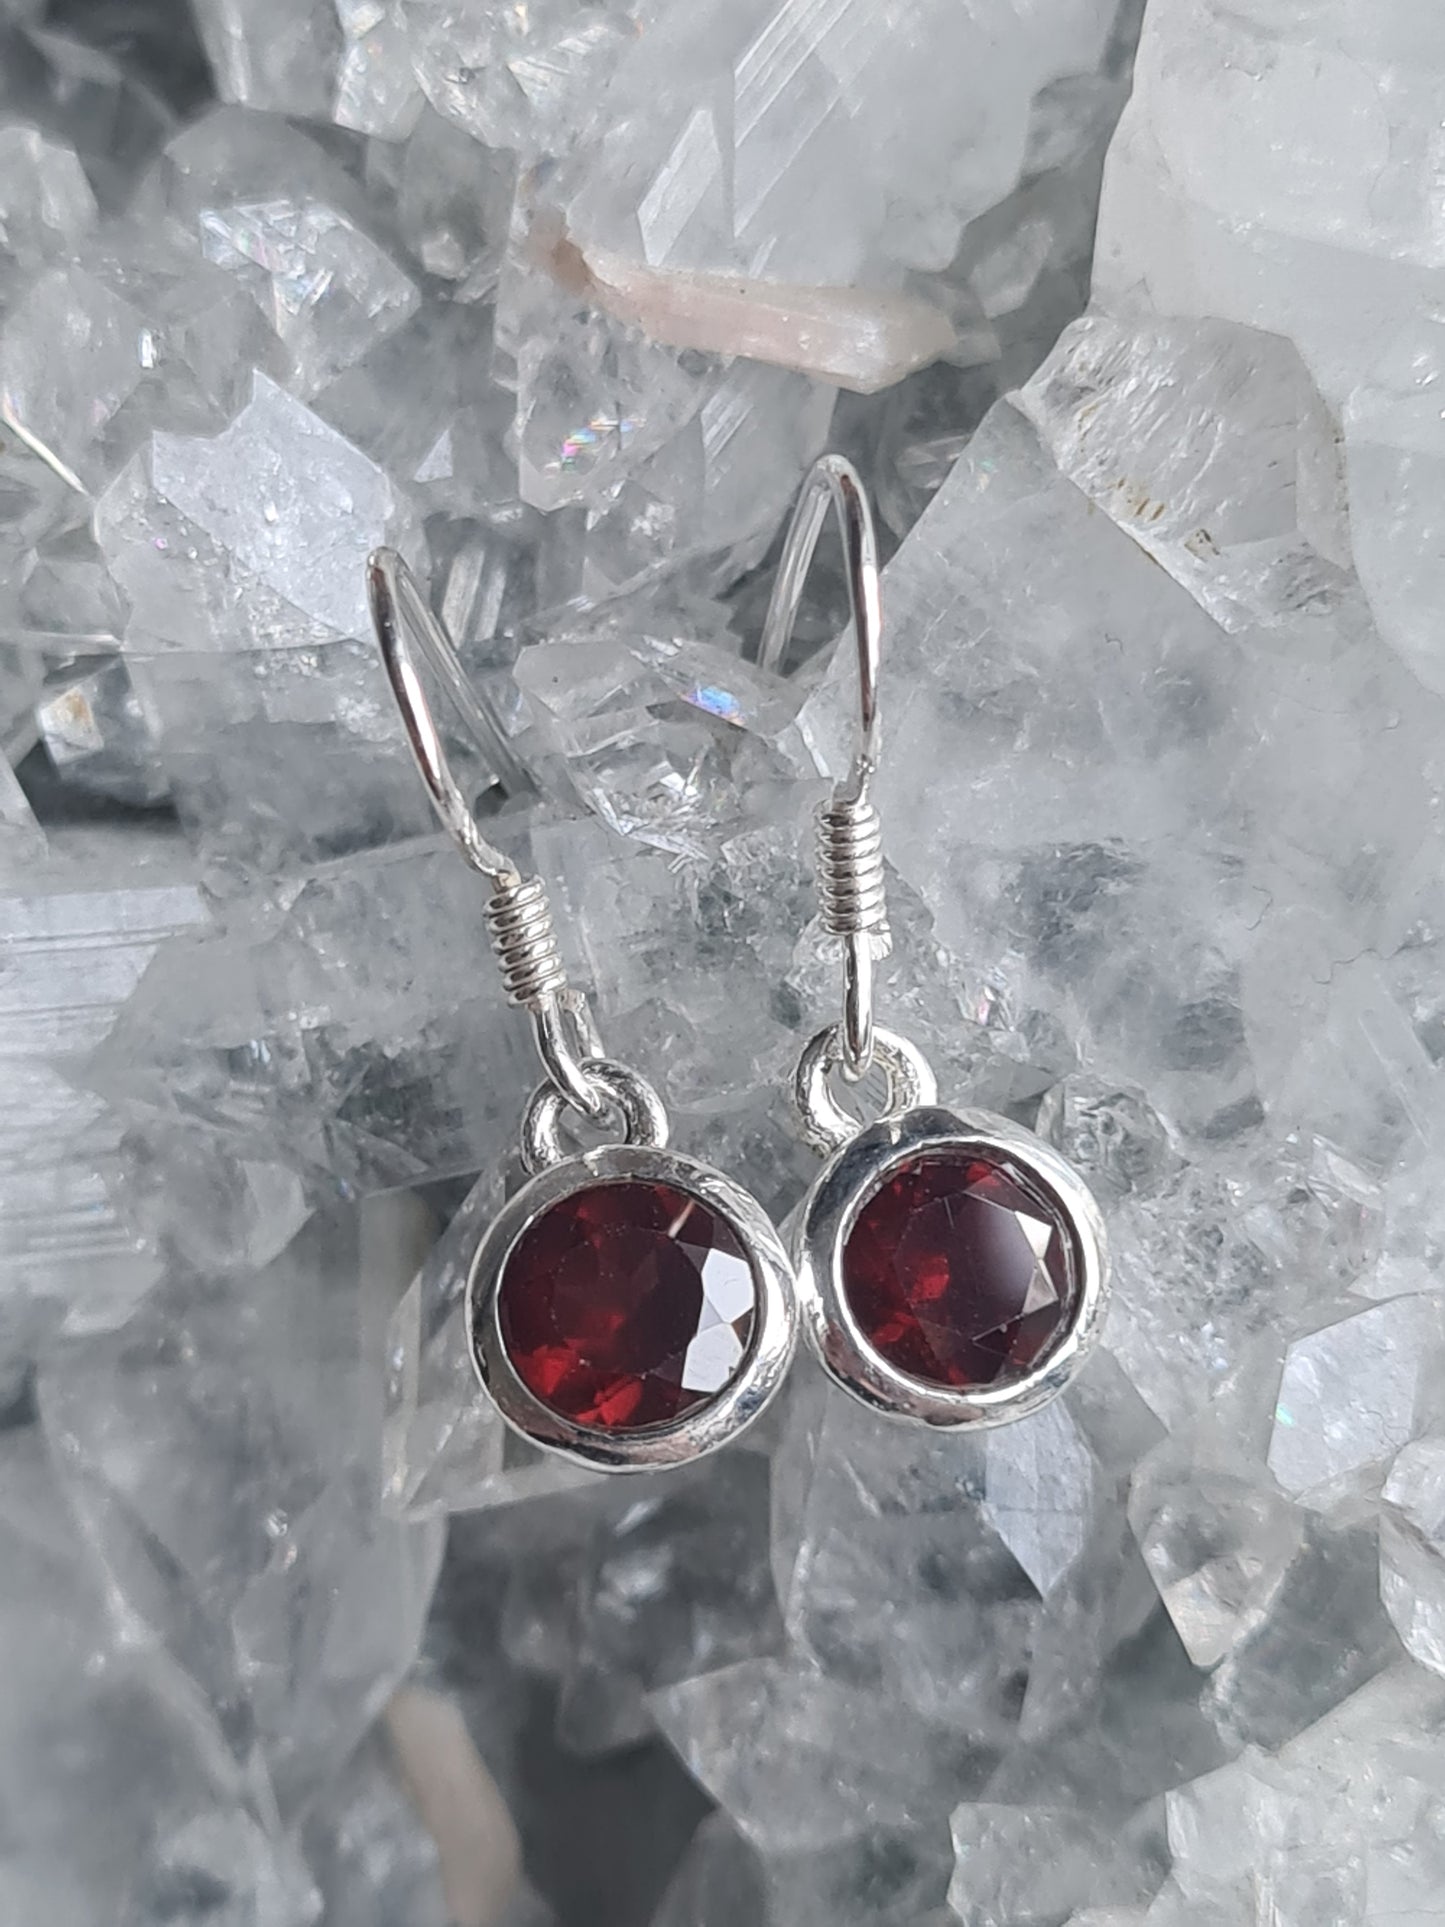 A pair of garnet set drop earrings, with a round faceted red garnet measuring 6mm diameter, set into sterling silver